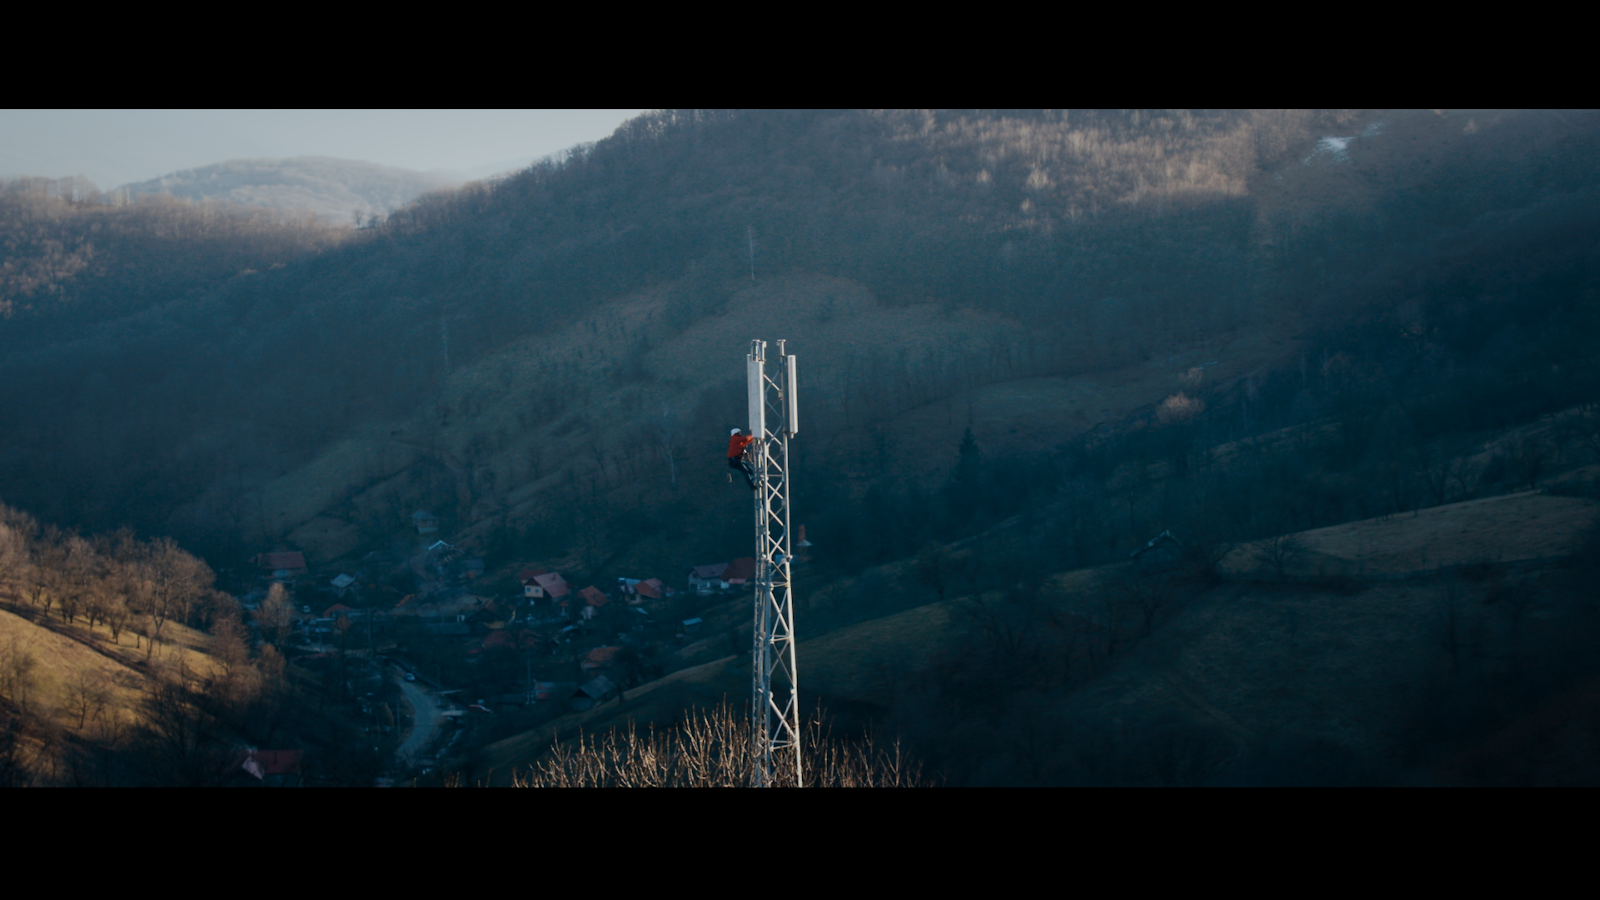 Connecting villages in rural Romania